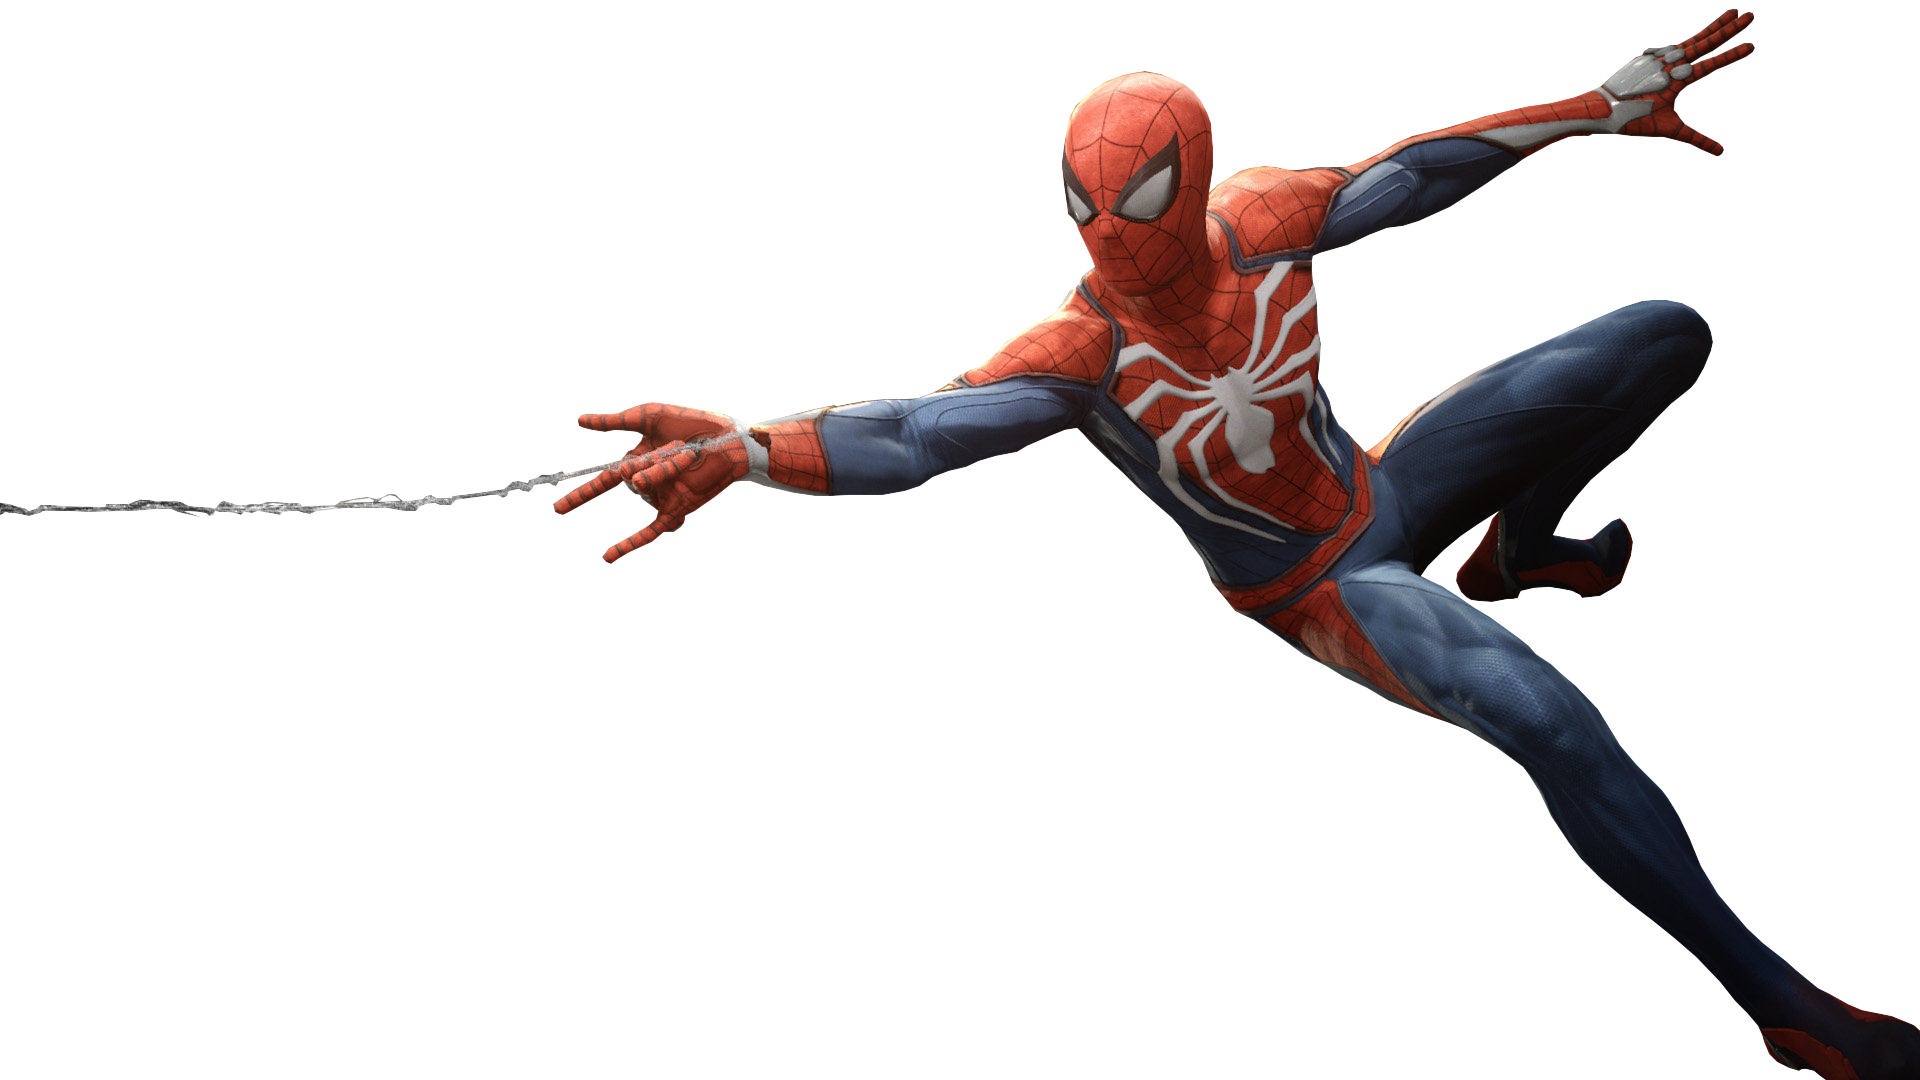 Spiderman Jump Background PNG Transparent Background, Free Download #47354  - FreeIconsPNG